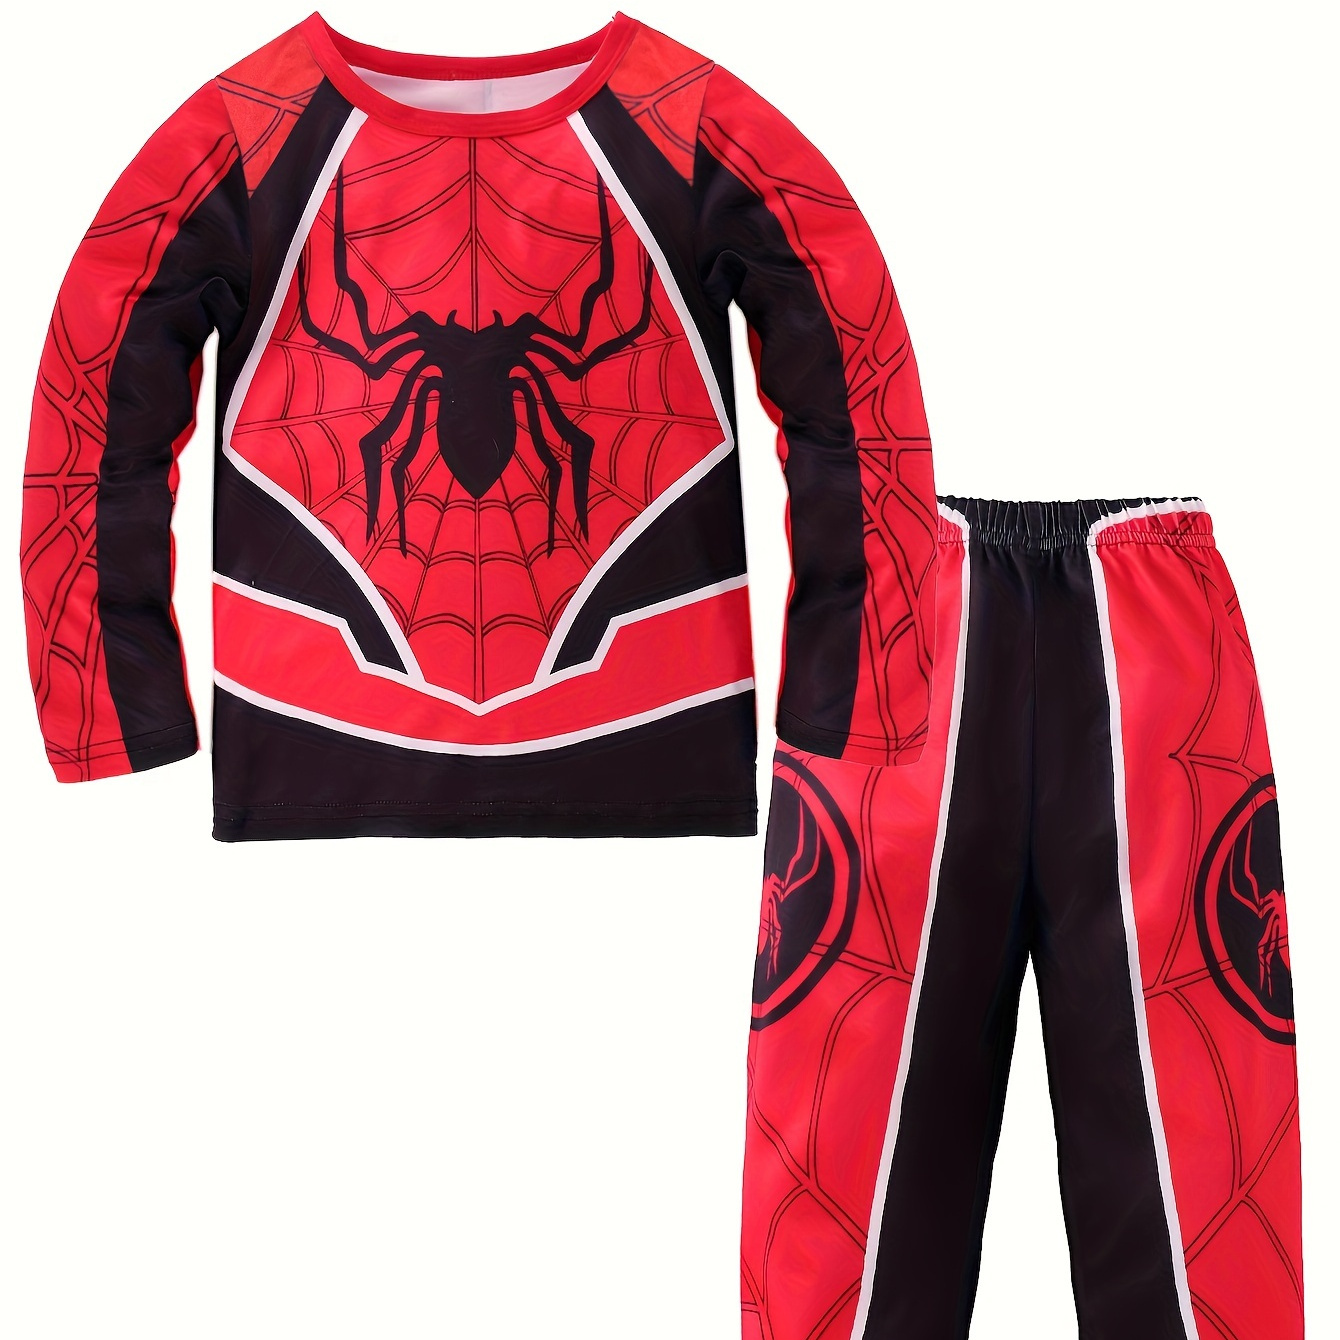 

Toddler Boys 2-piece Trendy Pajama Sets Cosplay Imitation Pattern Round Neck Long Sleeve Top & Matching Pants Comfy Casual Pj Sets